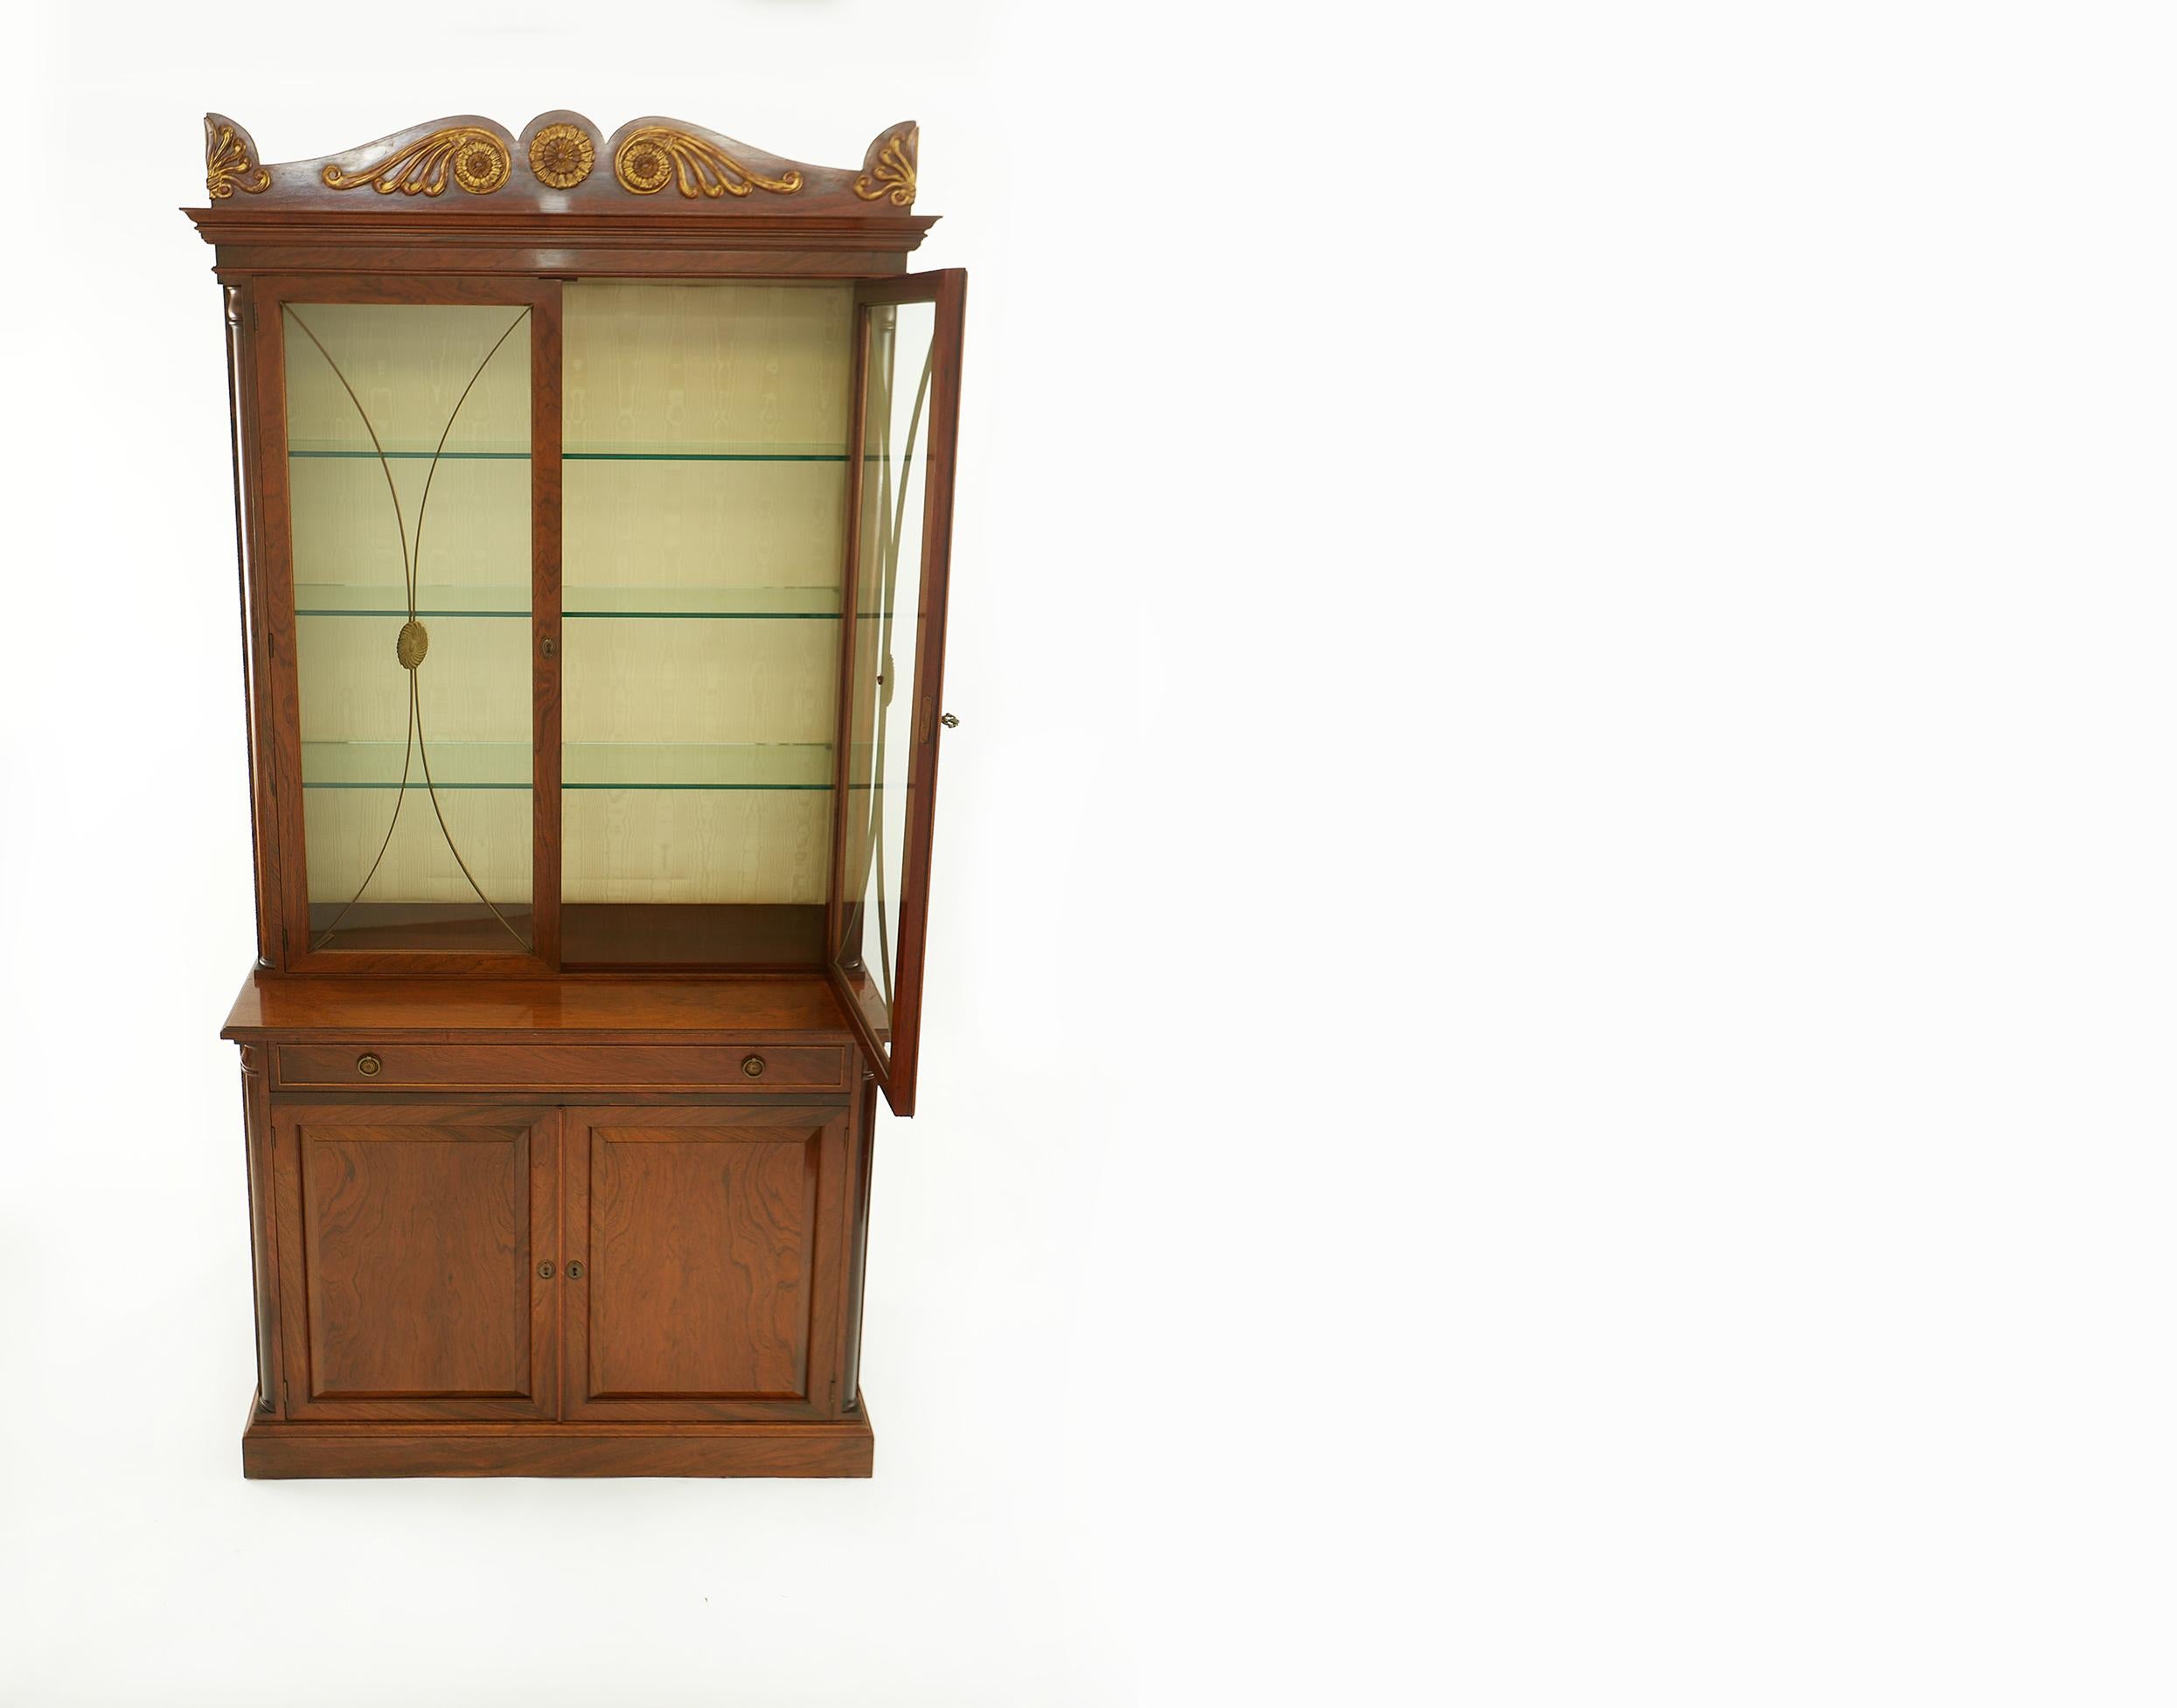 19th century regency style rosewood grained and partially gilt top design details display cabinet / bookcase. The upper part of the cabinet section feature an anthemion carved pediment above a pair of brass mounted glass doors opening to glass